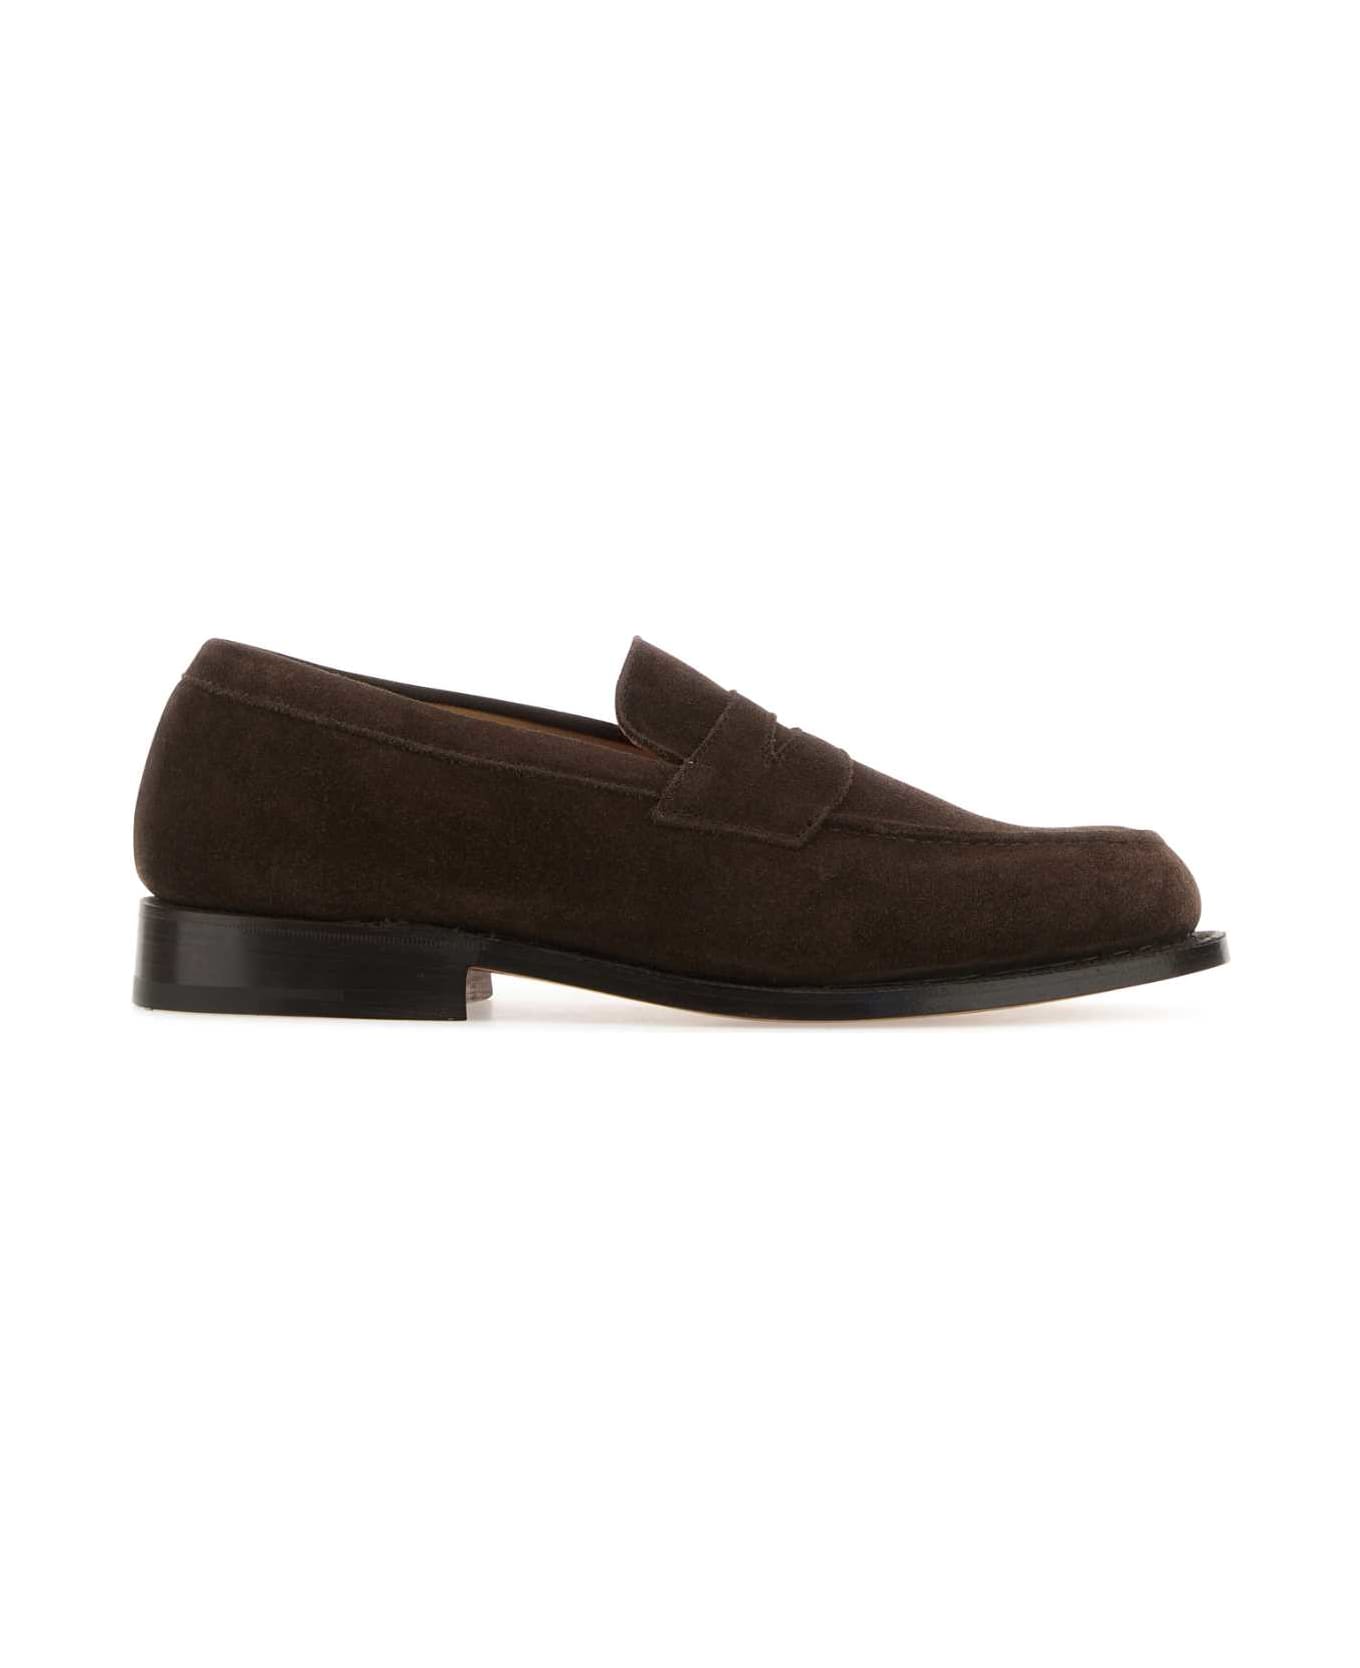 Tricker's Brown Suede Repello Loafers - CAFE